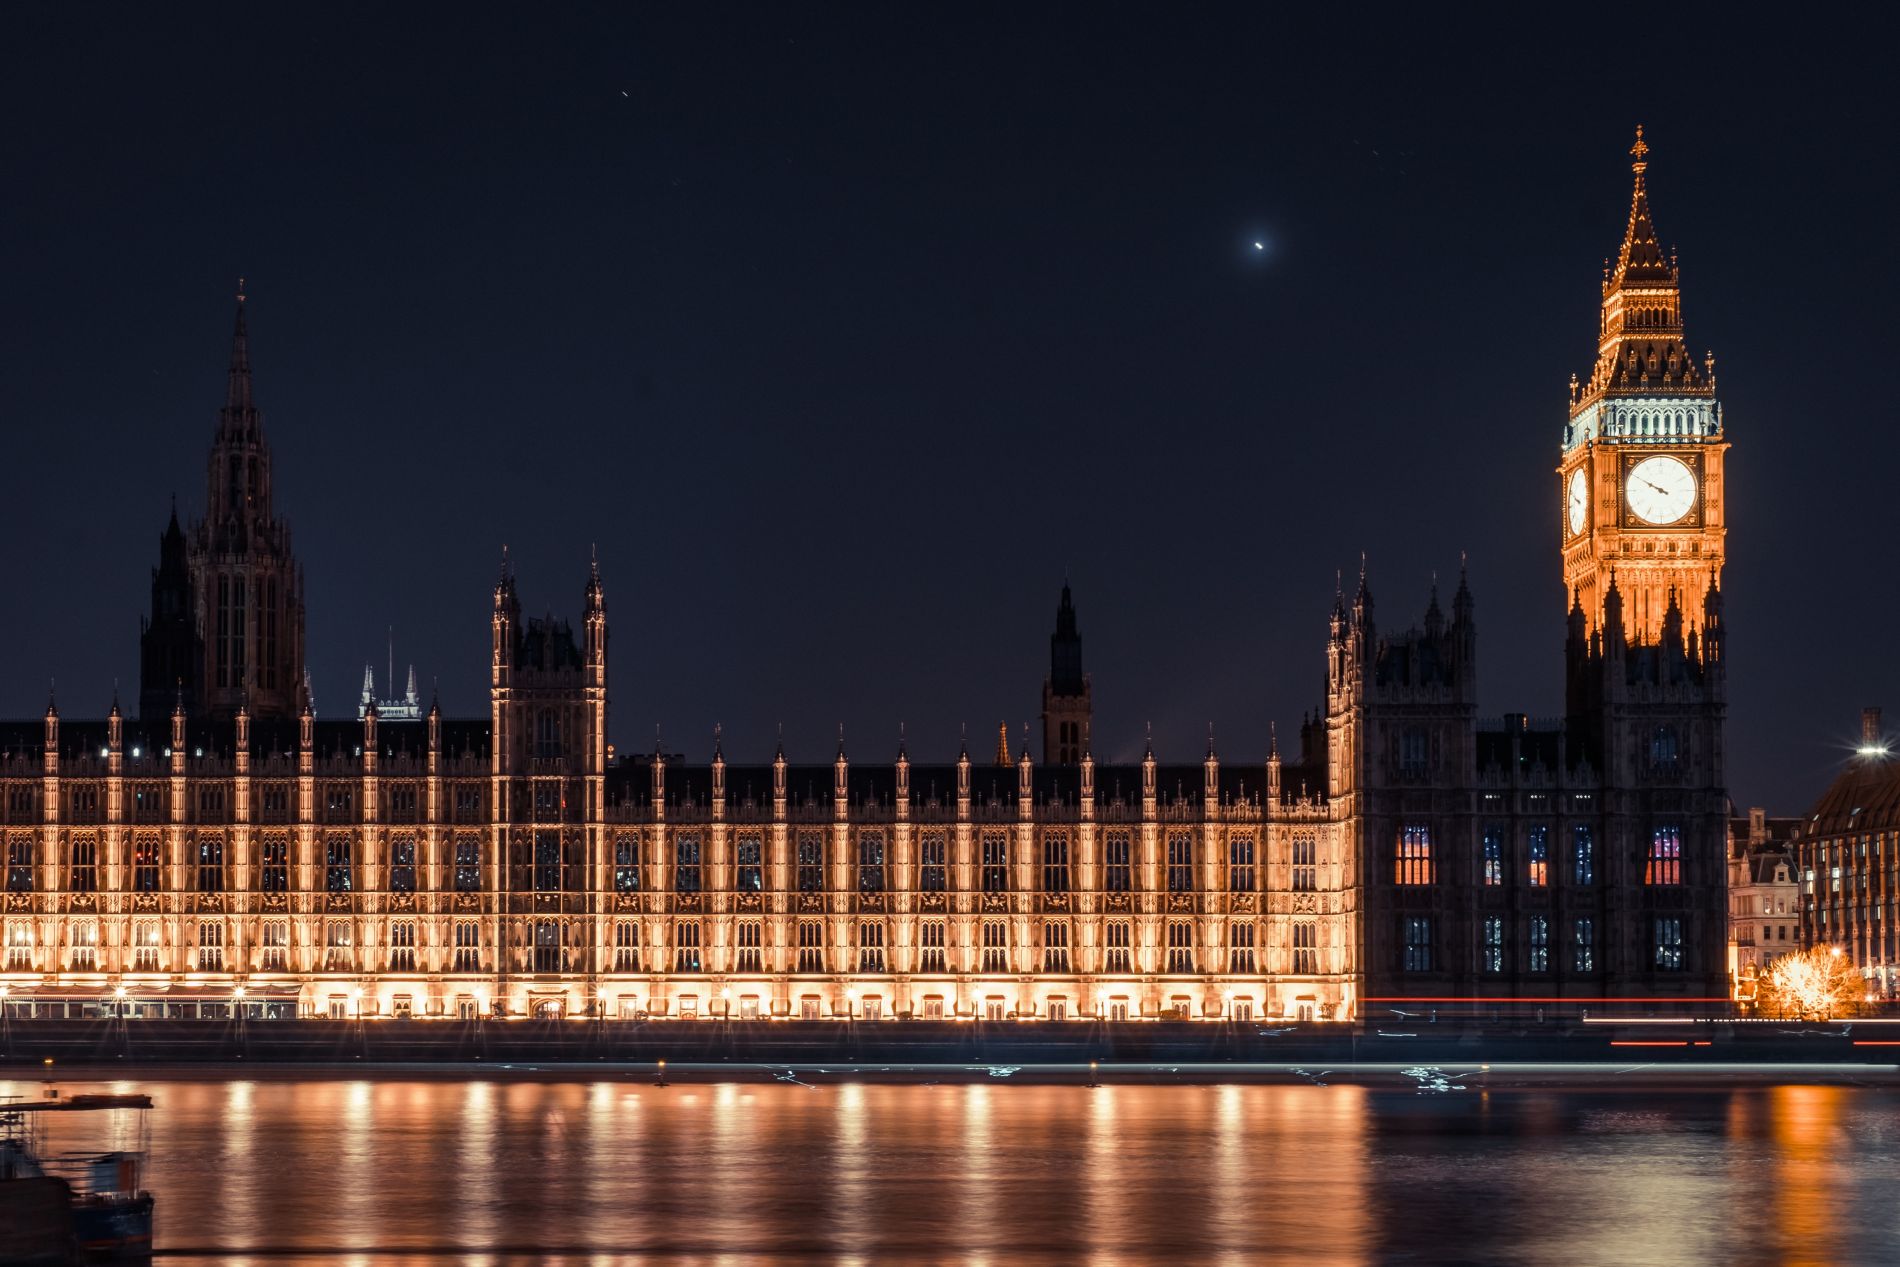 View of Westminster and Big Ben at night